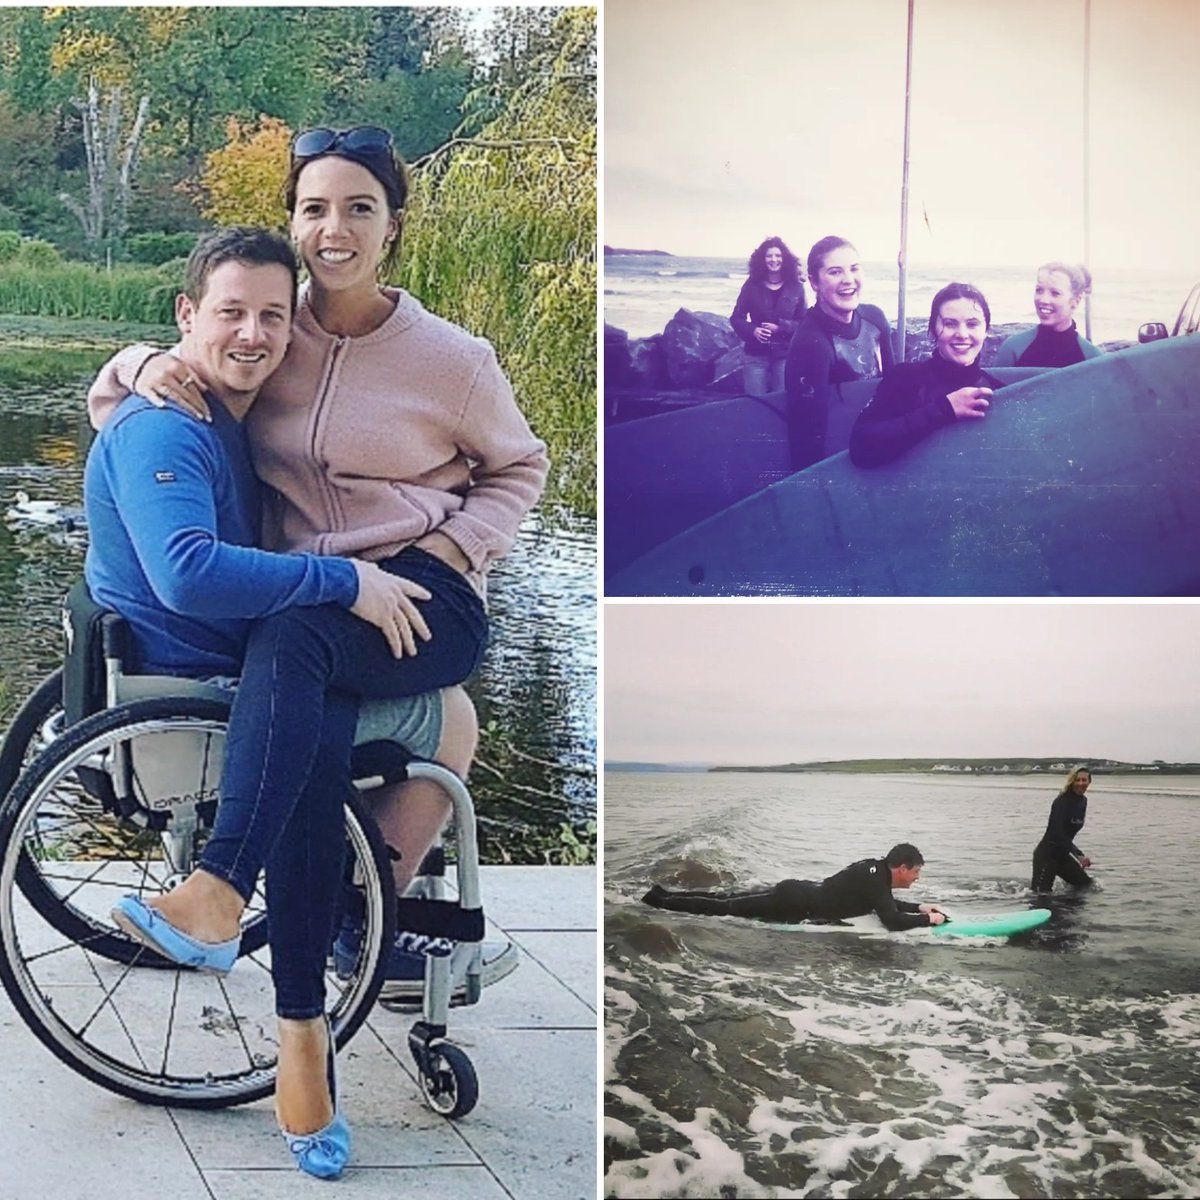 Different years, but we both had our first surf in Rossnowlagh 🏄🏻‍♀️♿
For #InternationalDisabilityDay we'd like to simply say..
Never underestimate couples like us. With the right support, we can explore the great outdoors just like every other couple. #IDPWD2023 #IDDP #Equality